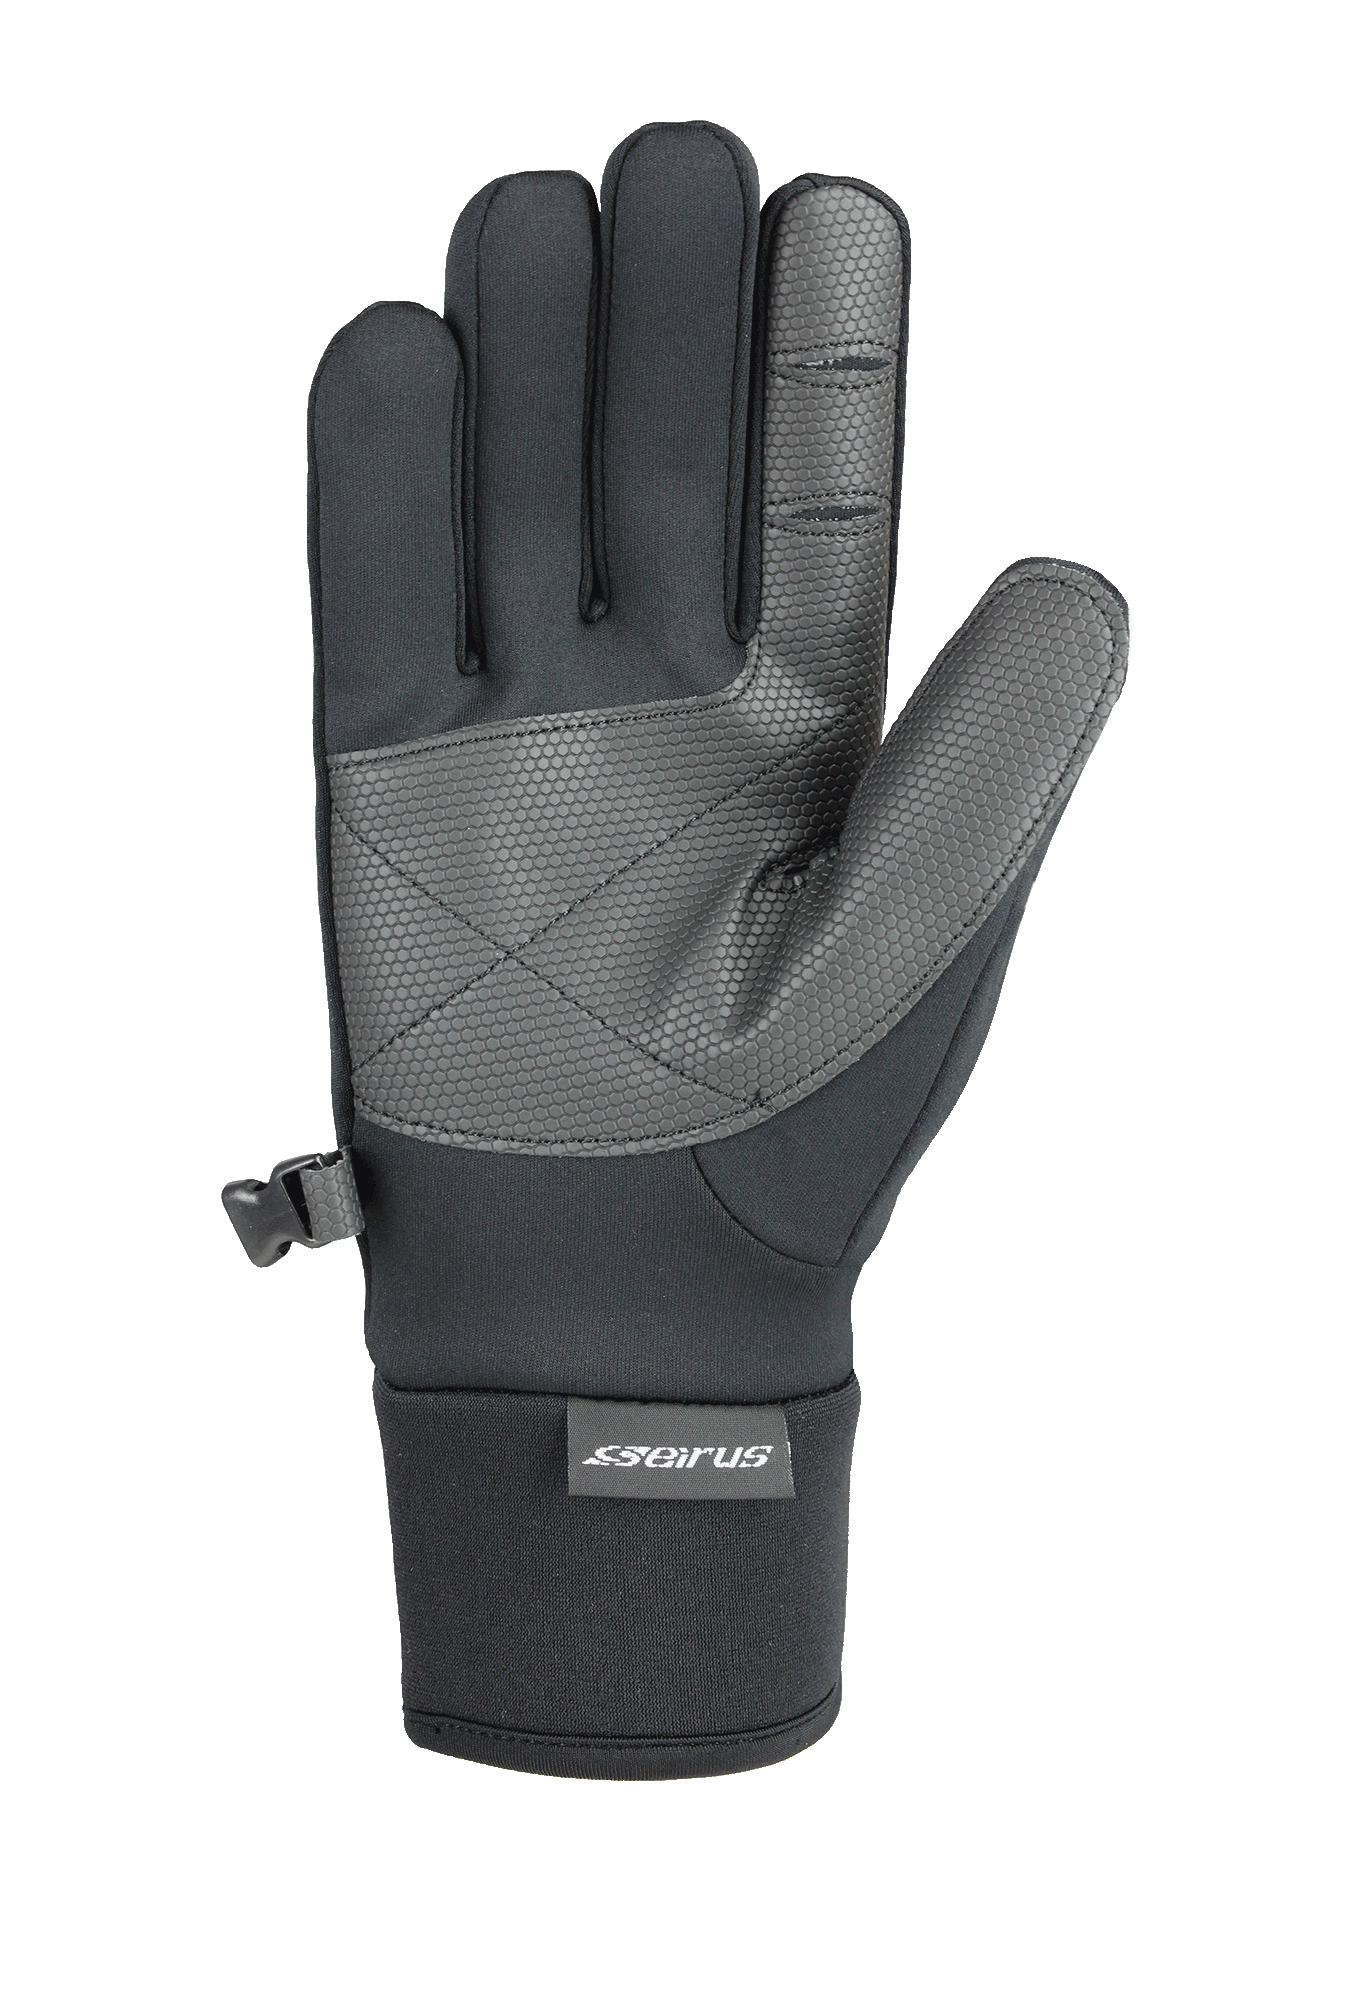 Seirus Women's Soundtouch Xtreme All Weather Glove